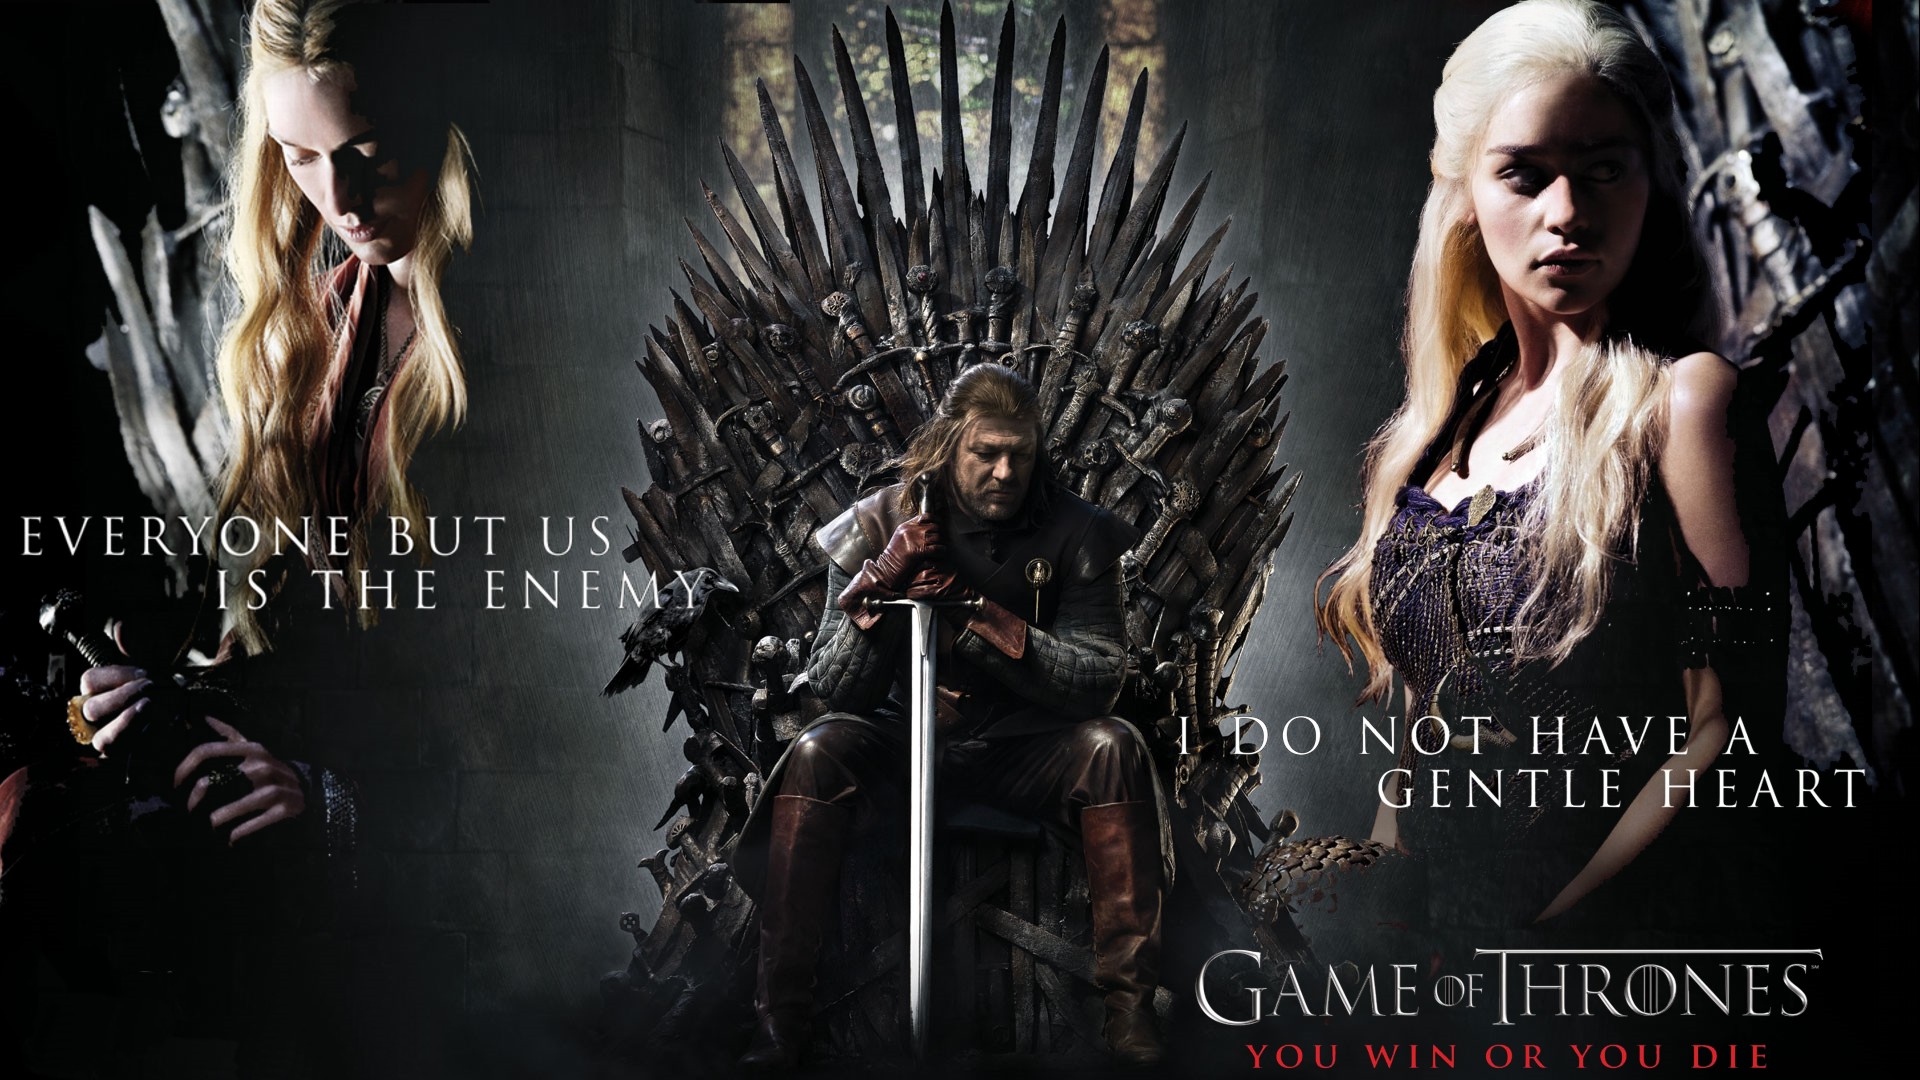 S Game Of Thrones Seasons In 3gp And Mp4 Ent3rtain